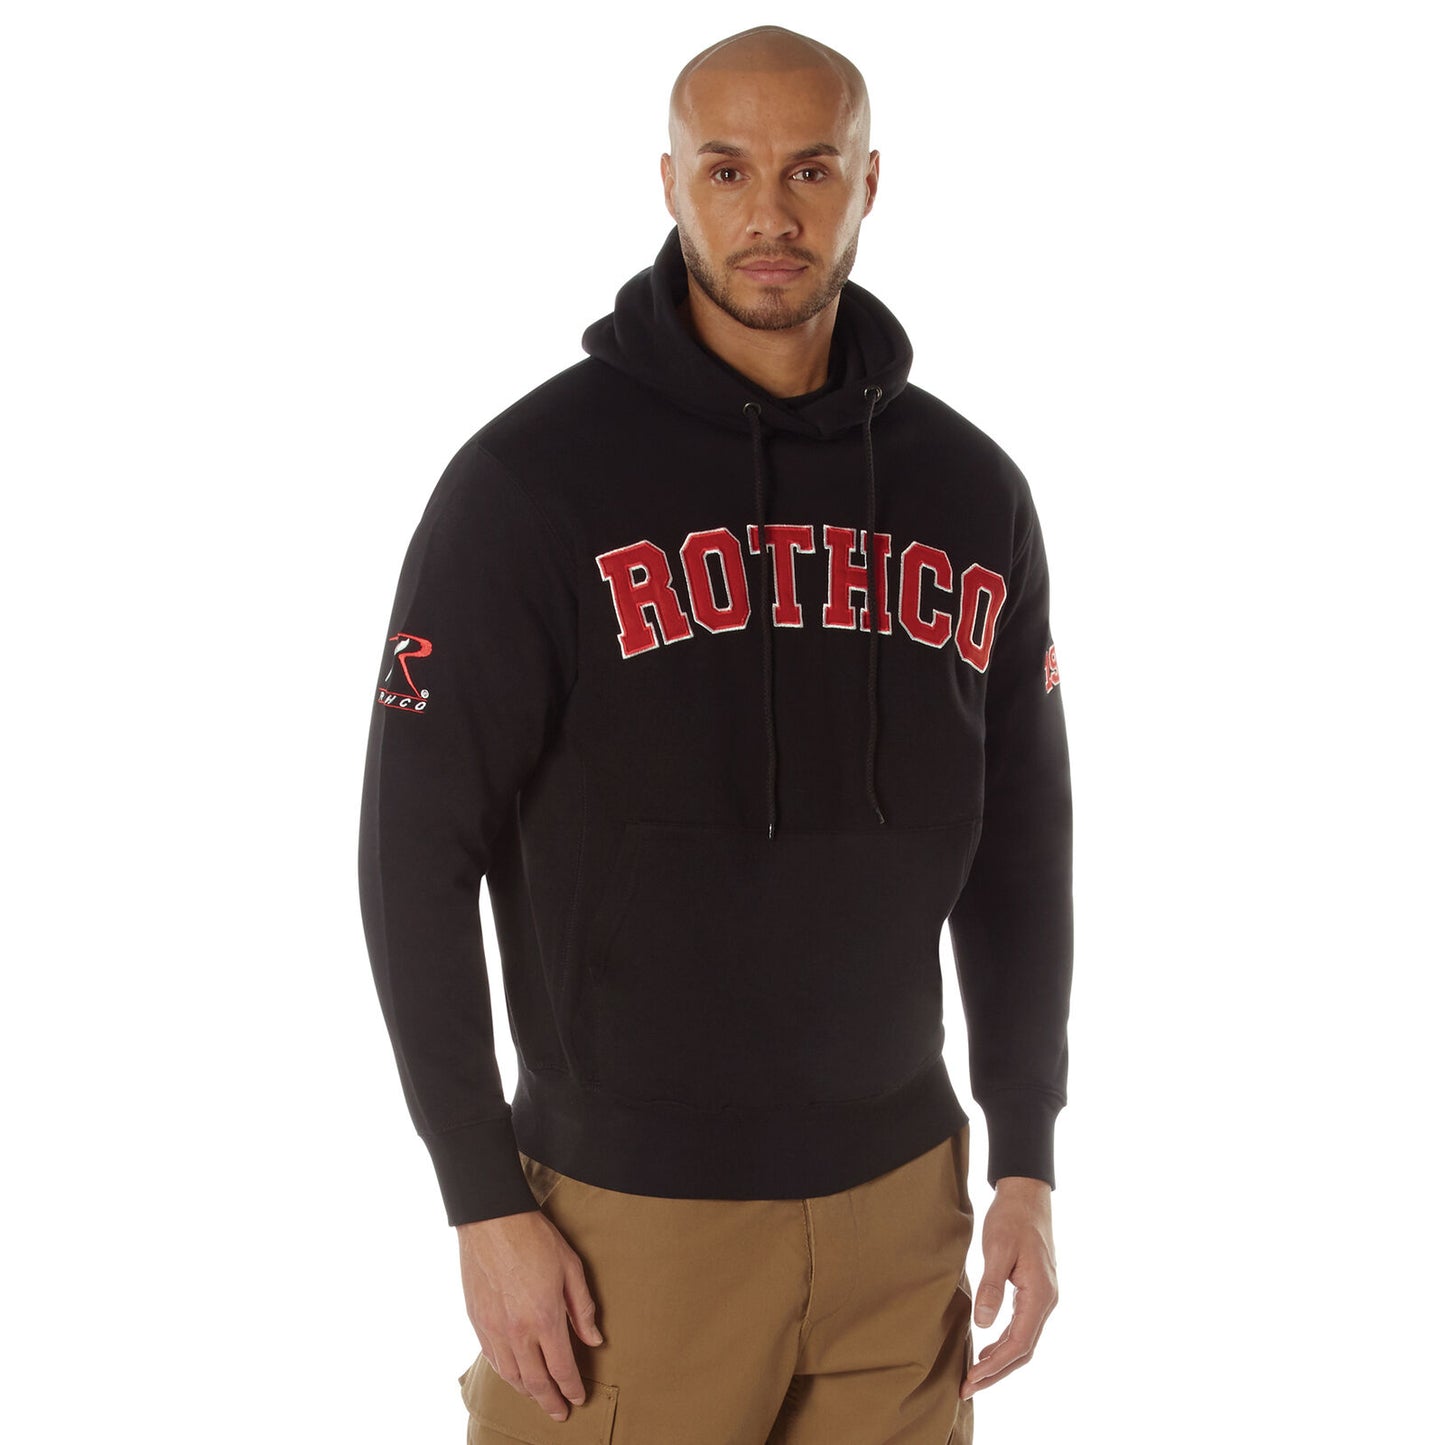 Rothco 1953 Embroidered Every Day Hoodie Black Pullover Hooded Sweatshirt